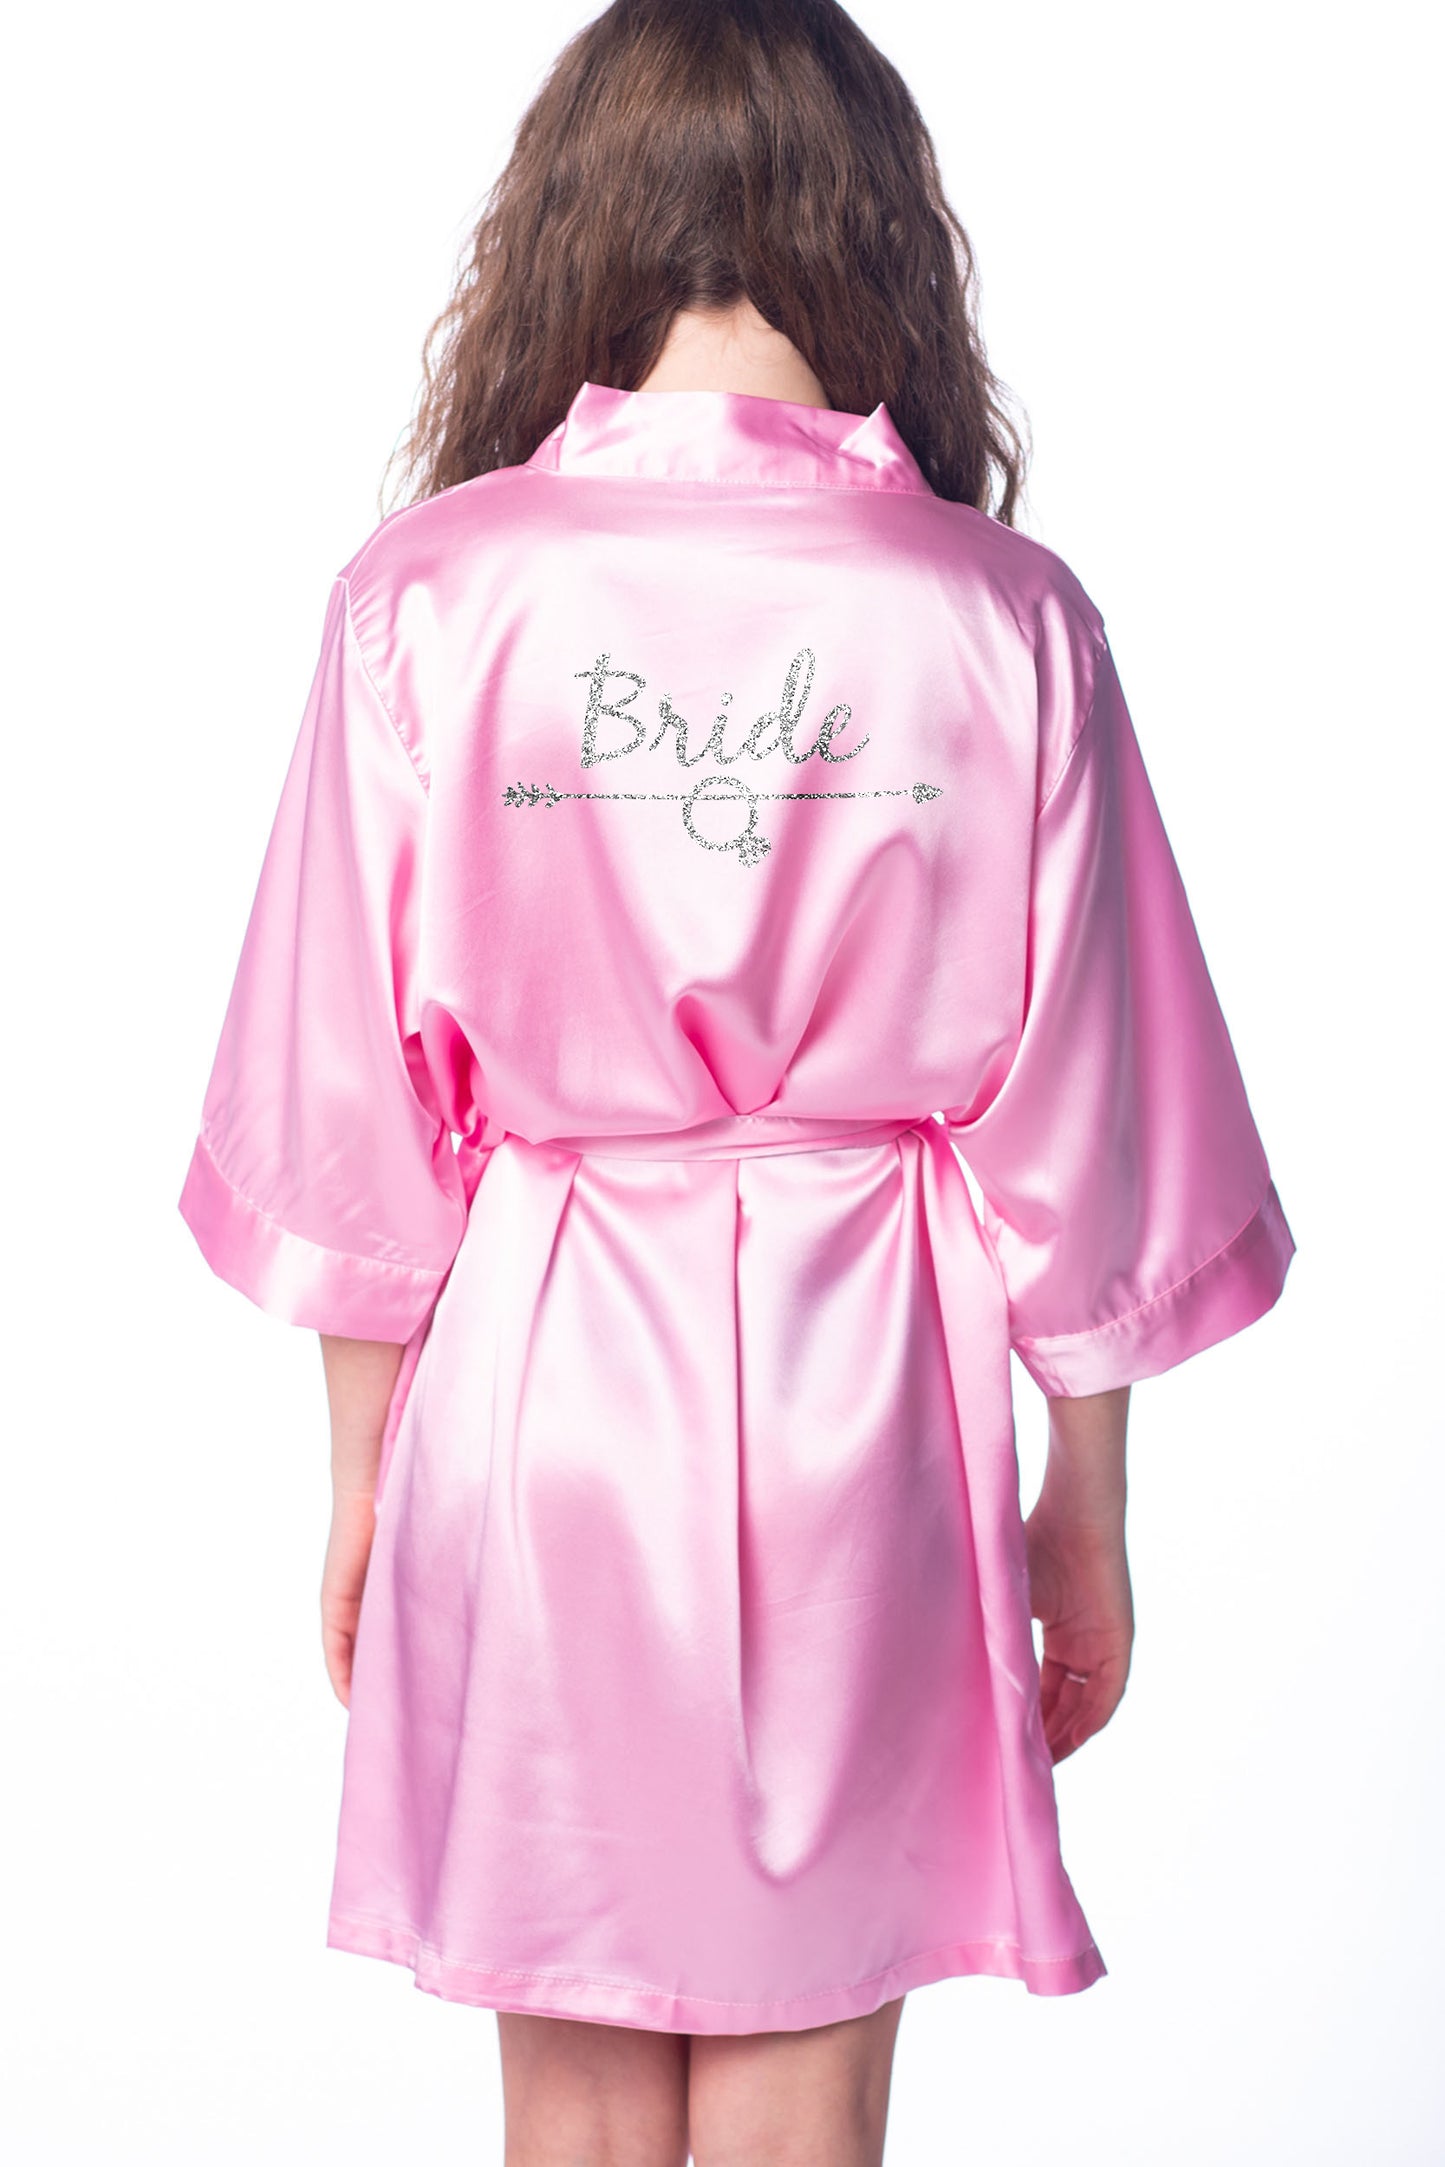 S/M "Bride" Pink Satin Robe - Arrow in Silver Glitter (Clearance Item)